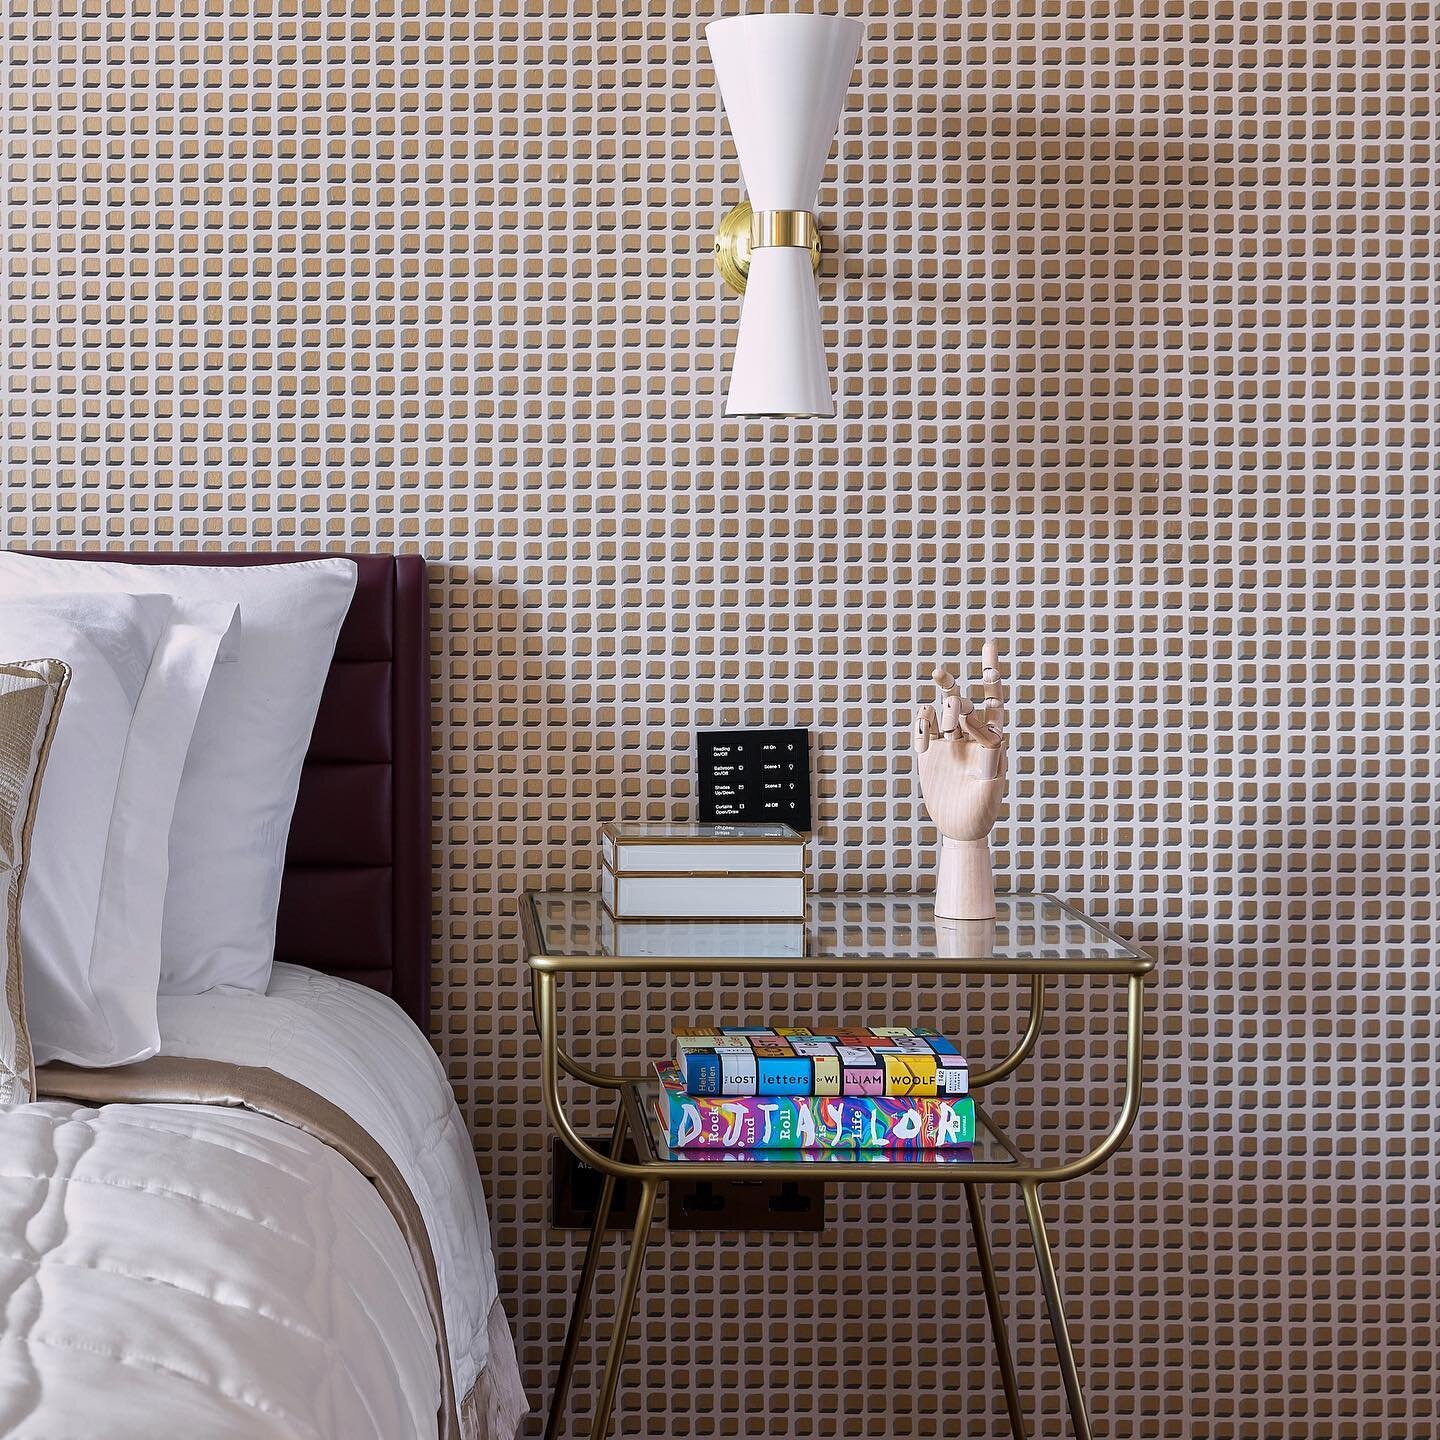 #wallpaper - recently completed site by us. 

Surface printed accents of metallic gold and bronze inspired by the symmetry and mosaics of the Art Deco period, adds a luxurious tone to this bedroom interior by @kirangala_and_associates